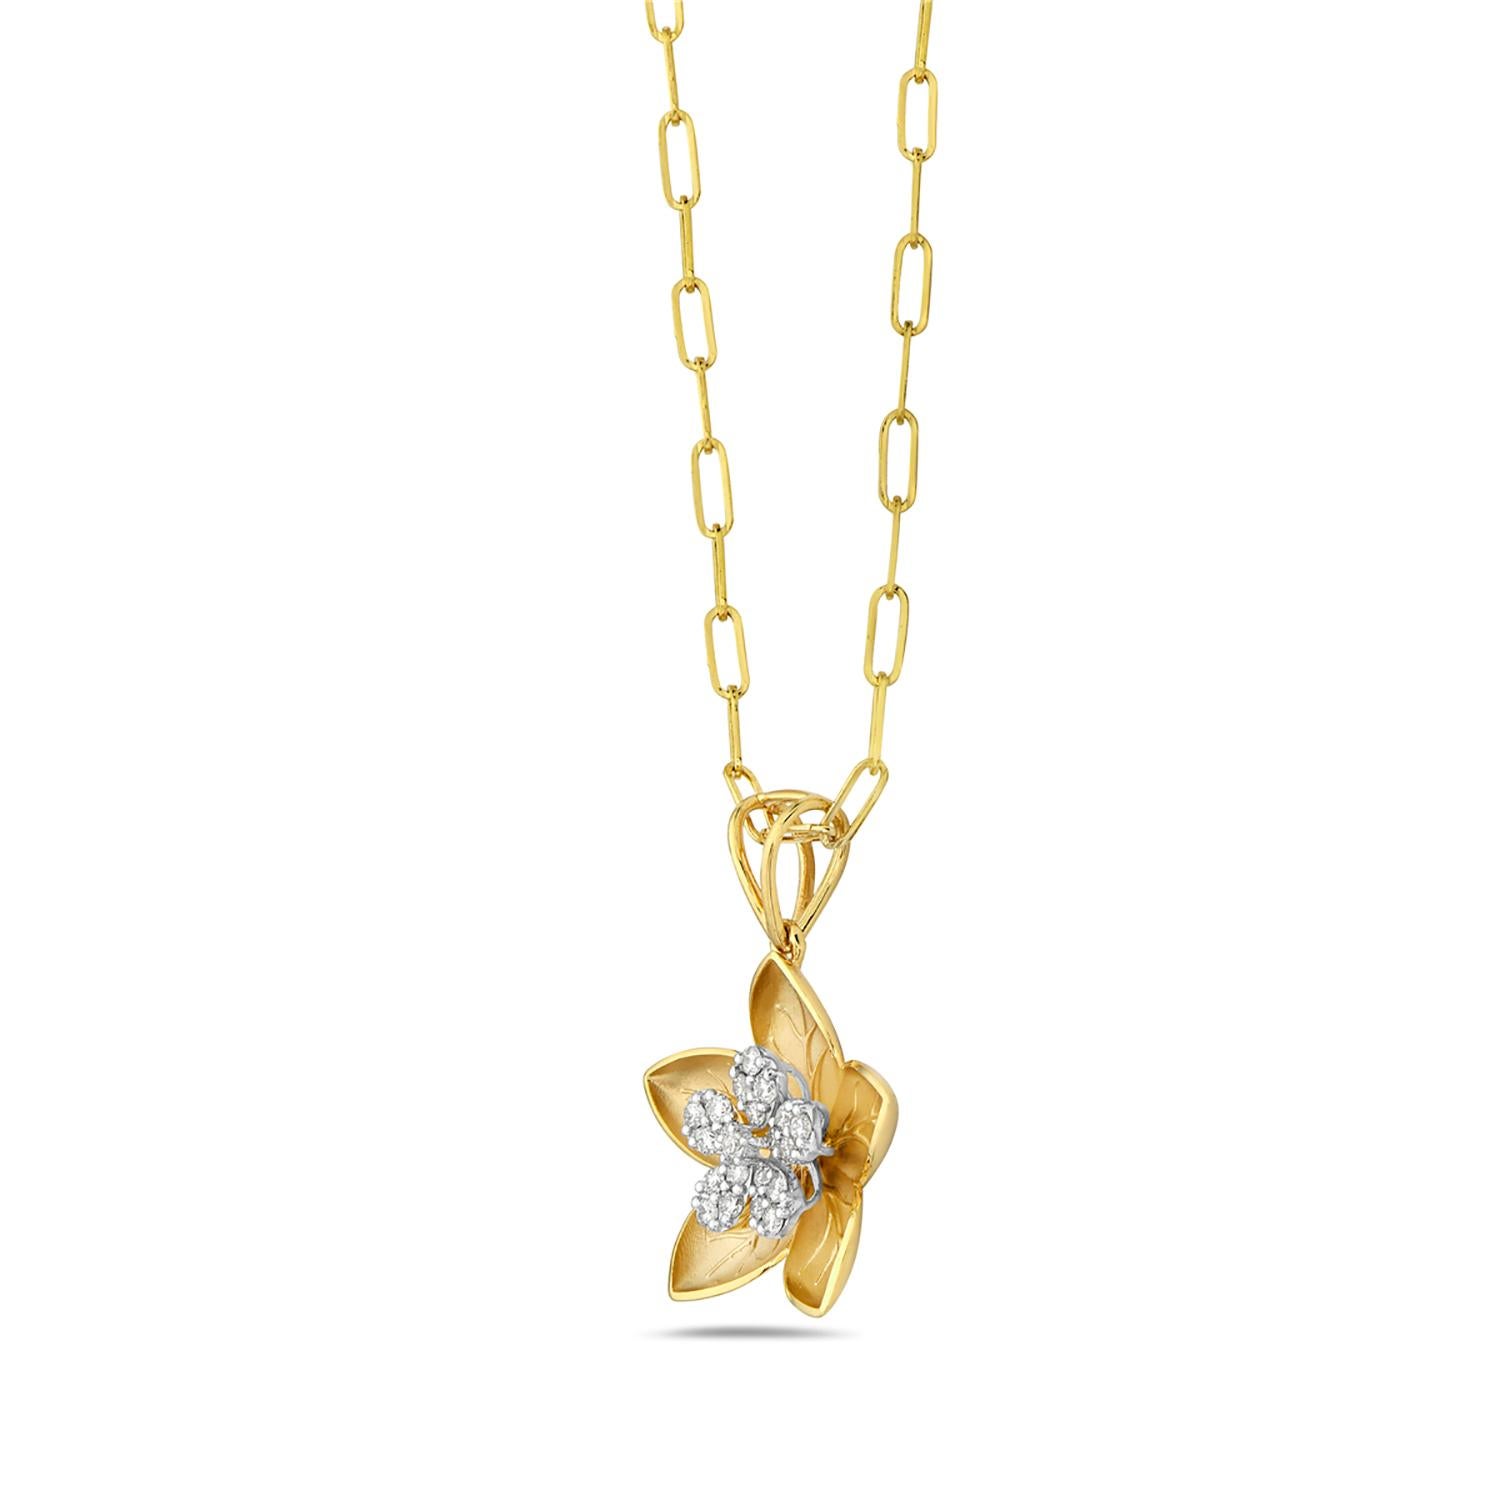 Art Deco Carved Flower Shaped Pendant with Diamonds Made in 14k Yellow Gold